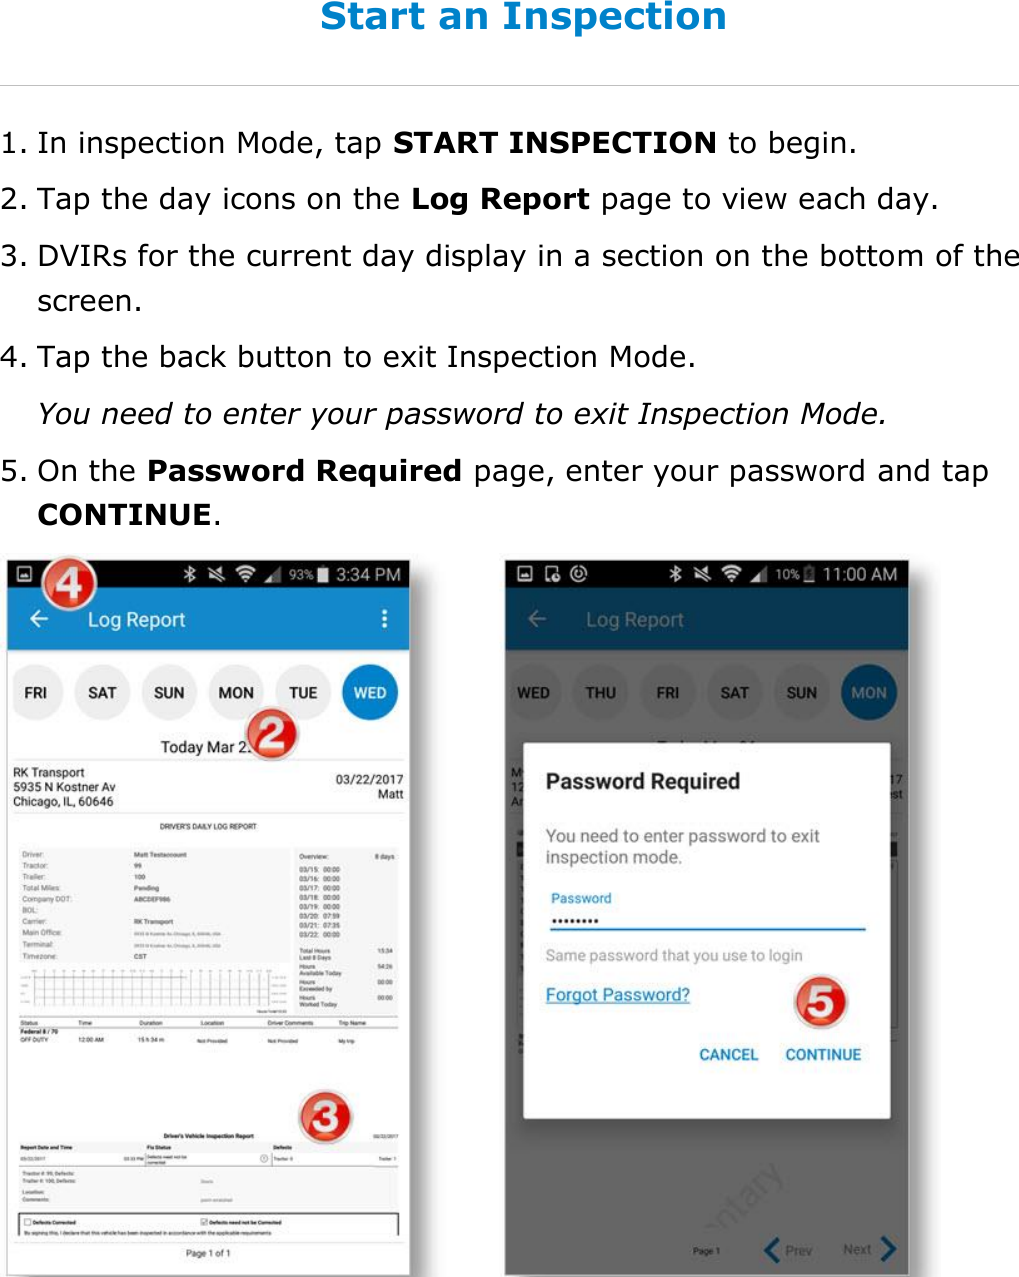 Use Inspection Mode DriverConnect User Guide  63 © 2016-2017, Rand McNally, Inc. Start an Inspection 1. In inspection Mode, tap START INSPECTION to begin. 2. Tap the day icons on the Log Report page to view each day. 3. DVIRs for the current day display in a section on the bottom of the screen. 4. Tap the back button to exit Inspection Mode.  You need to enter your password to exit Inspection Mode. 5. On the Password Required page, enter your password and tap CONTINUE.   